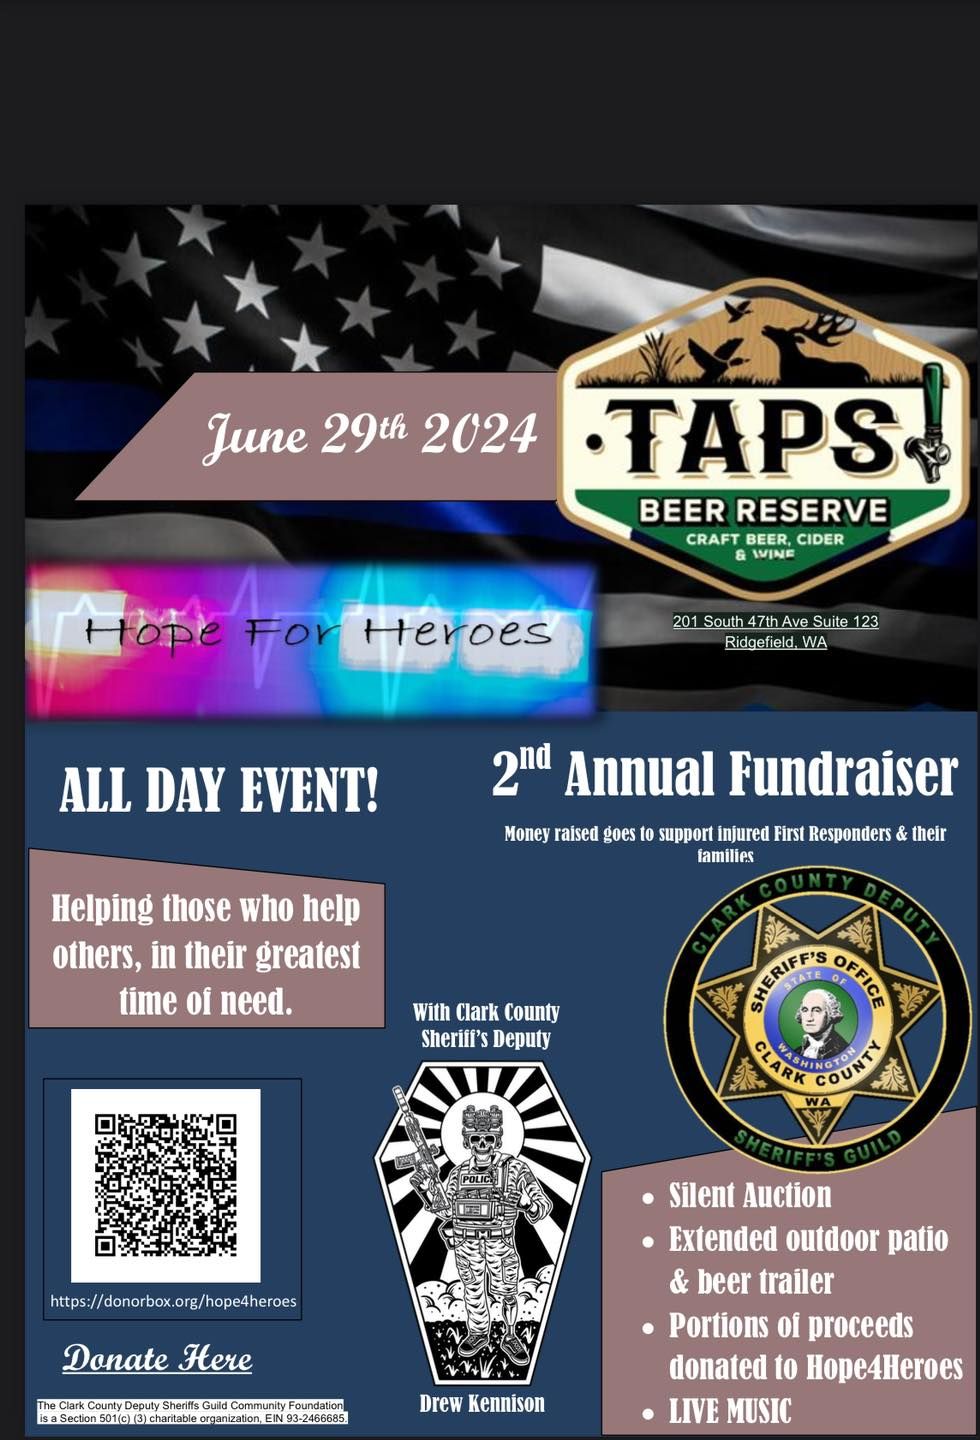 2nd Annual Hope For Heroes fundraiser